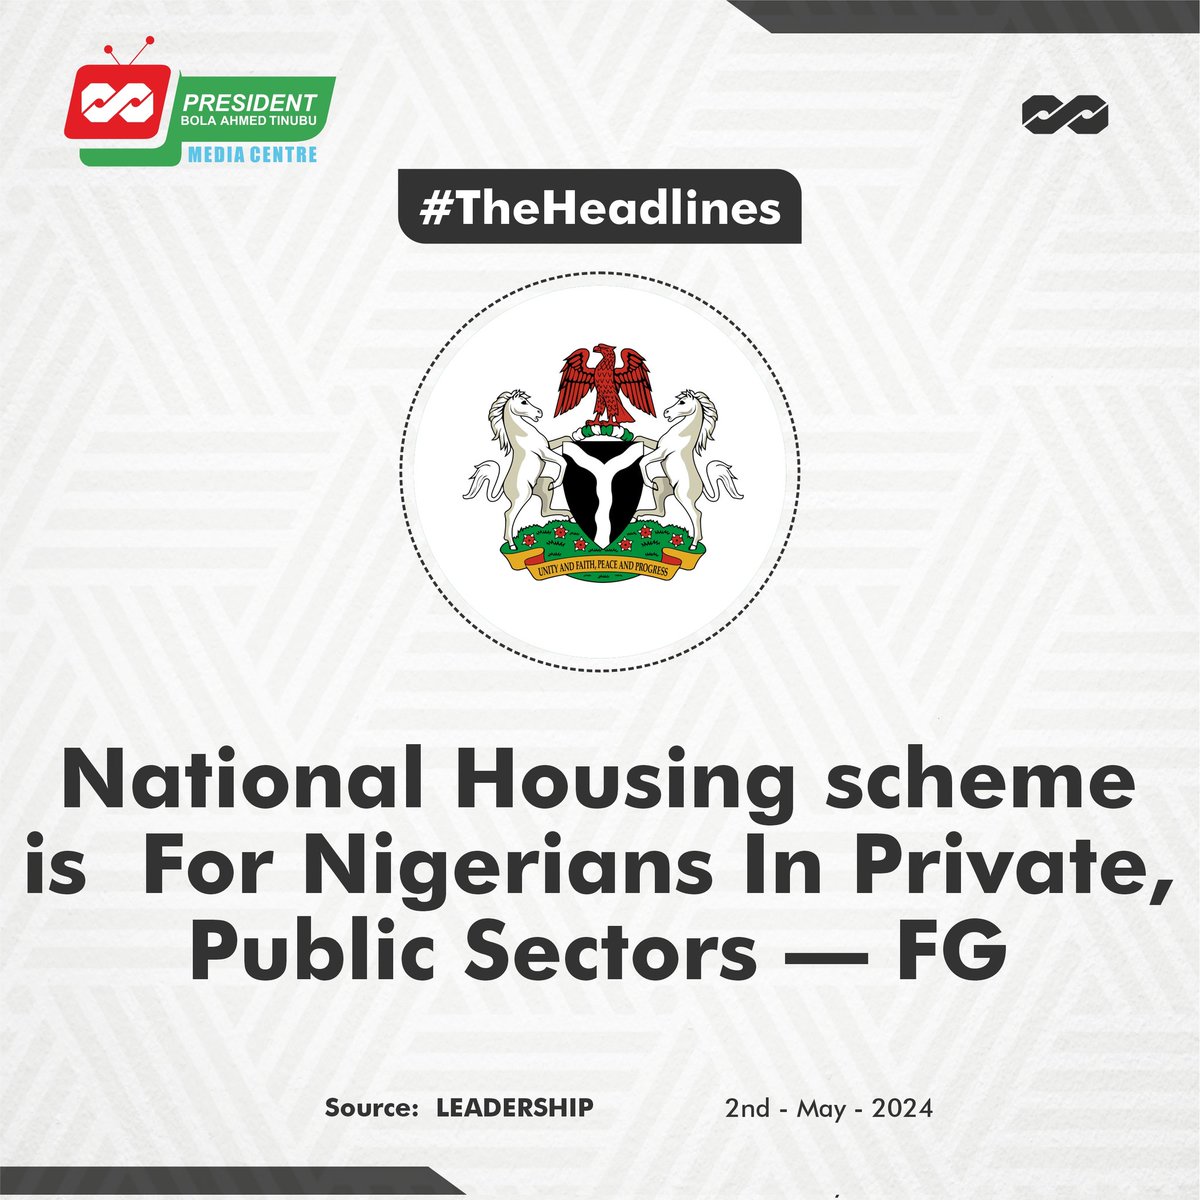 The top #TheHeadlines this morning include the twin headlines of President Tinubu assuring workers that the days of worrying over earning a living wage are gone, and the promise that Minimum wage implementation takes effect from May 1, 2024. Good morning, Nigerians...